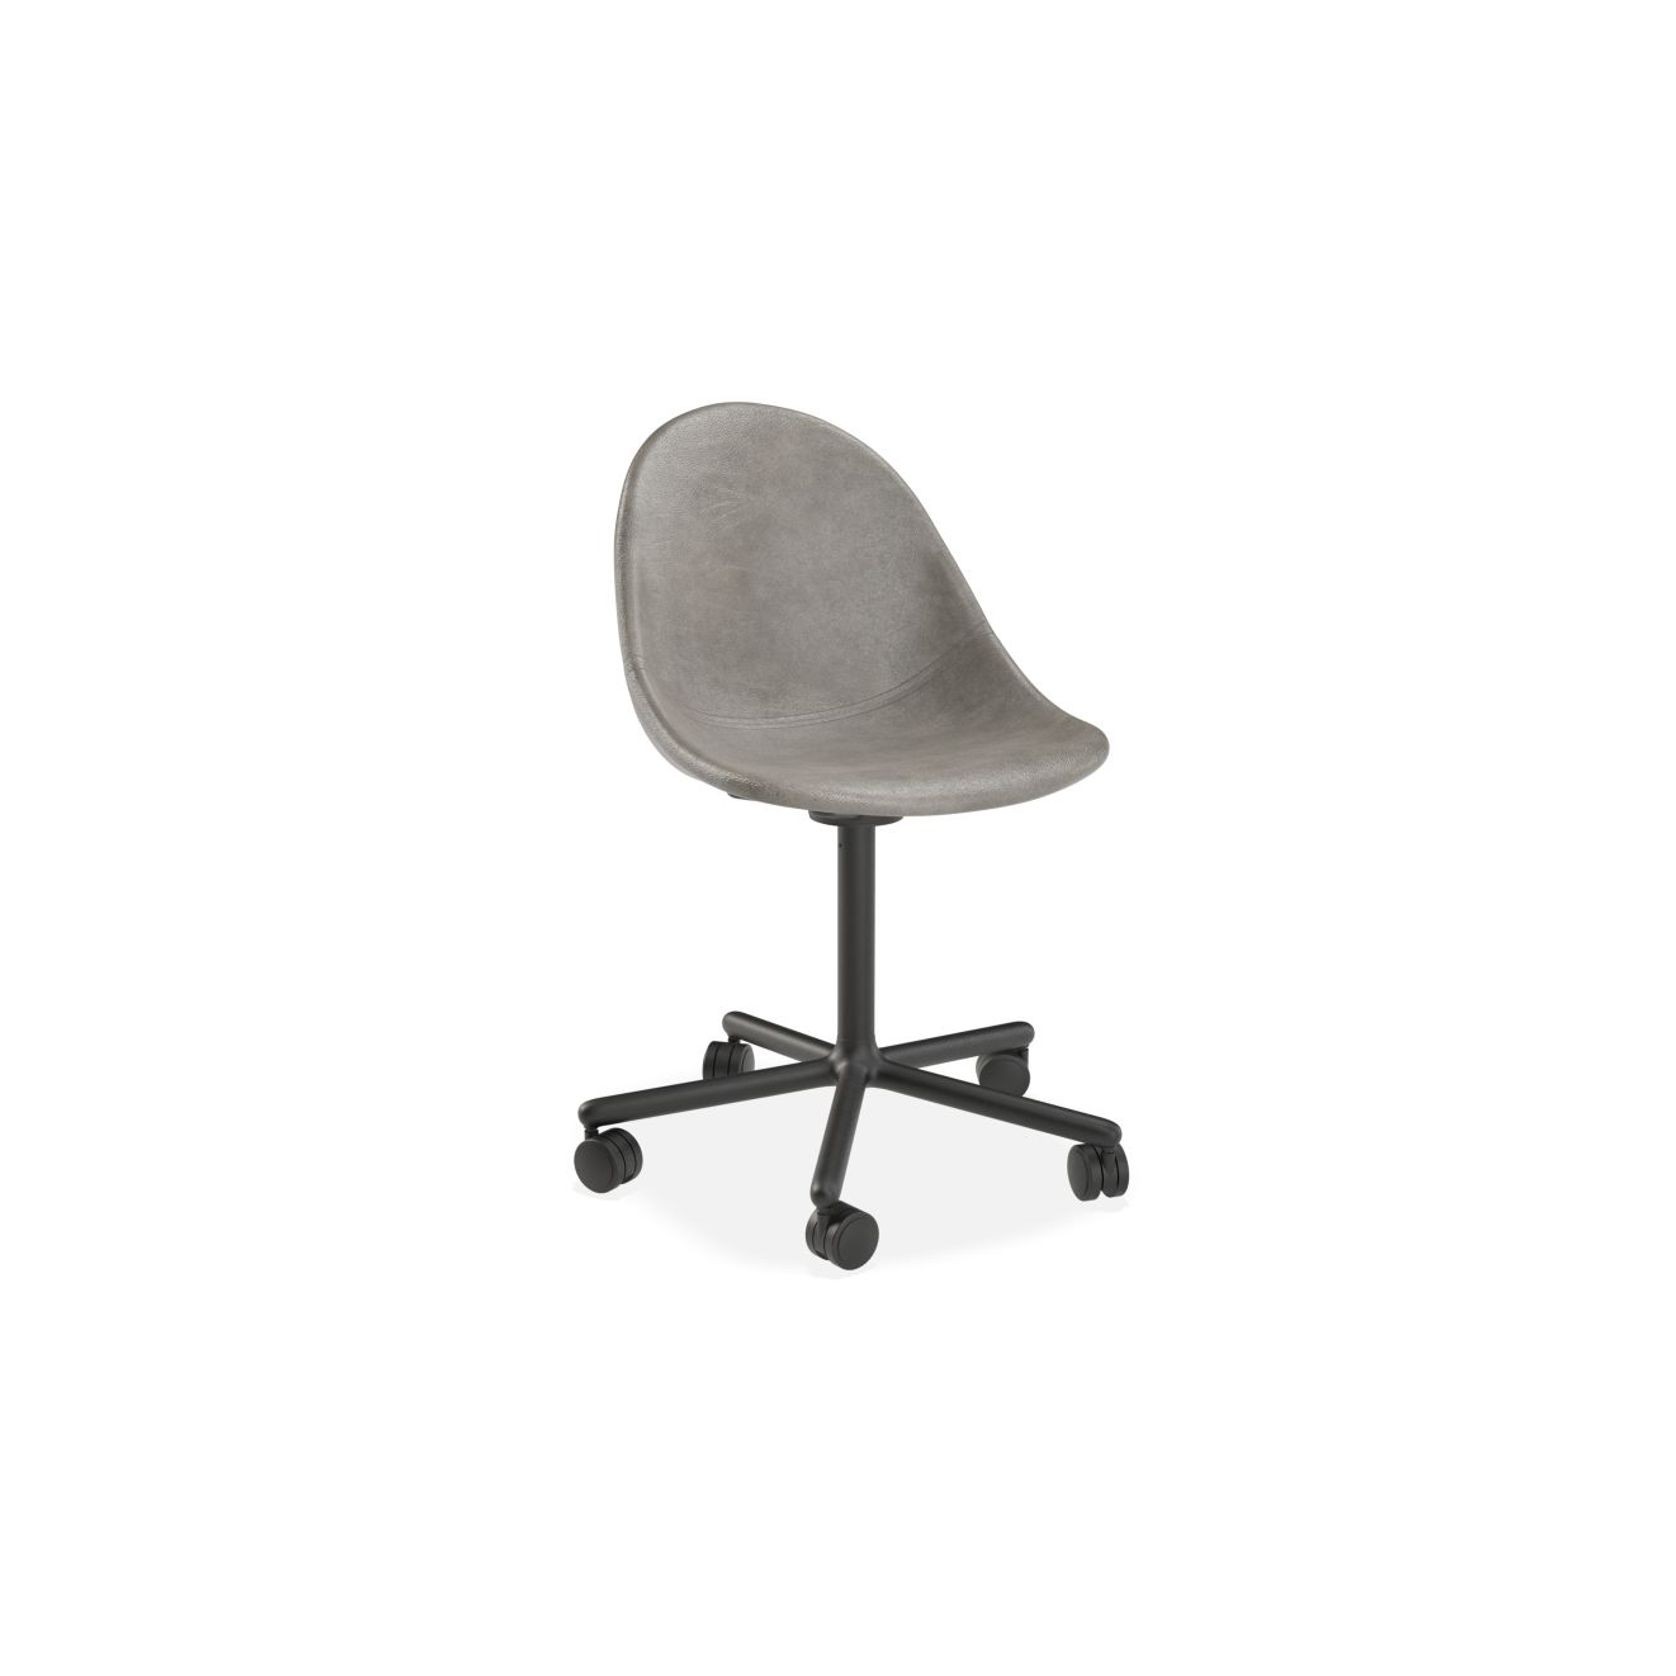 Pebble Chair Grey Upholstered Vintage Seat - Sled Base - White gallery detail image